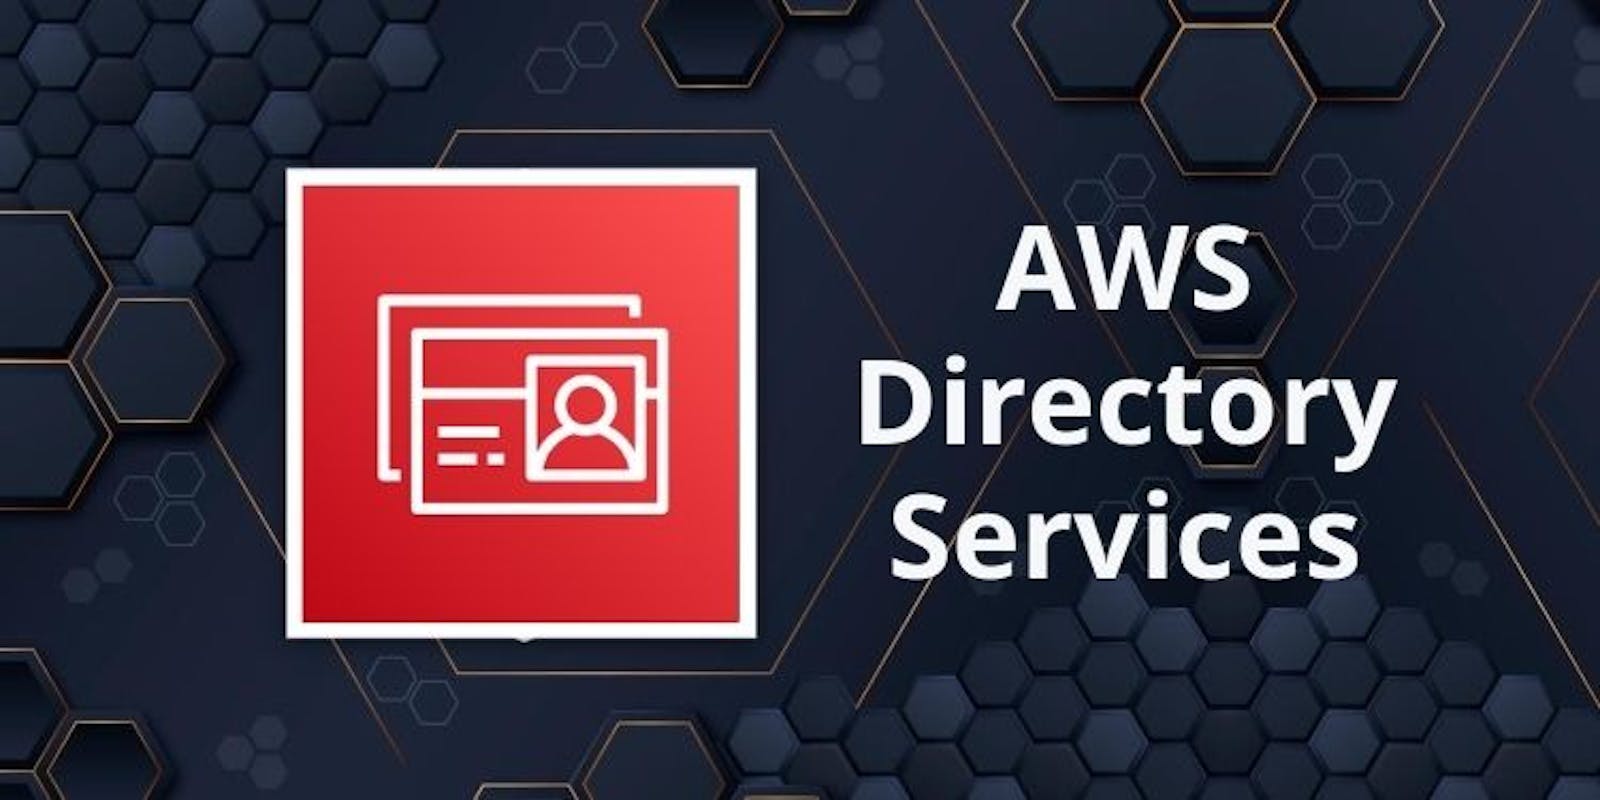 A Beginner's Guide to Using Directory Services in AWS